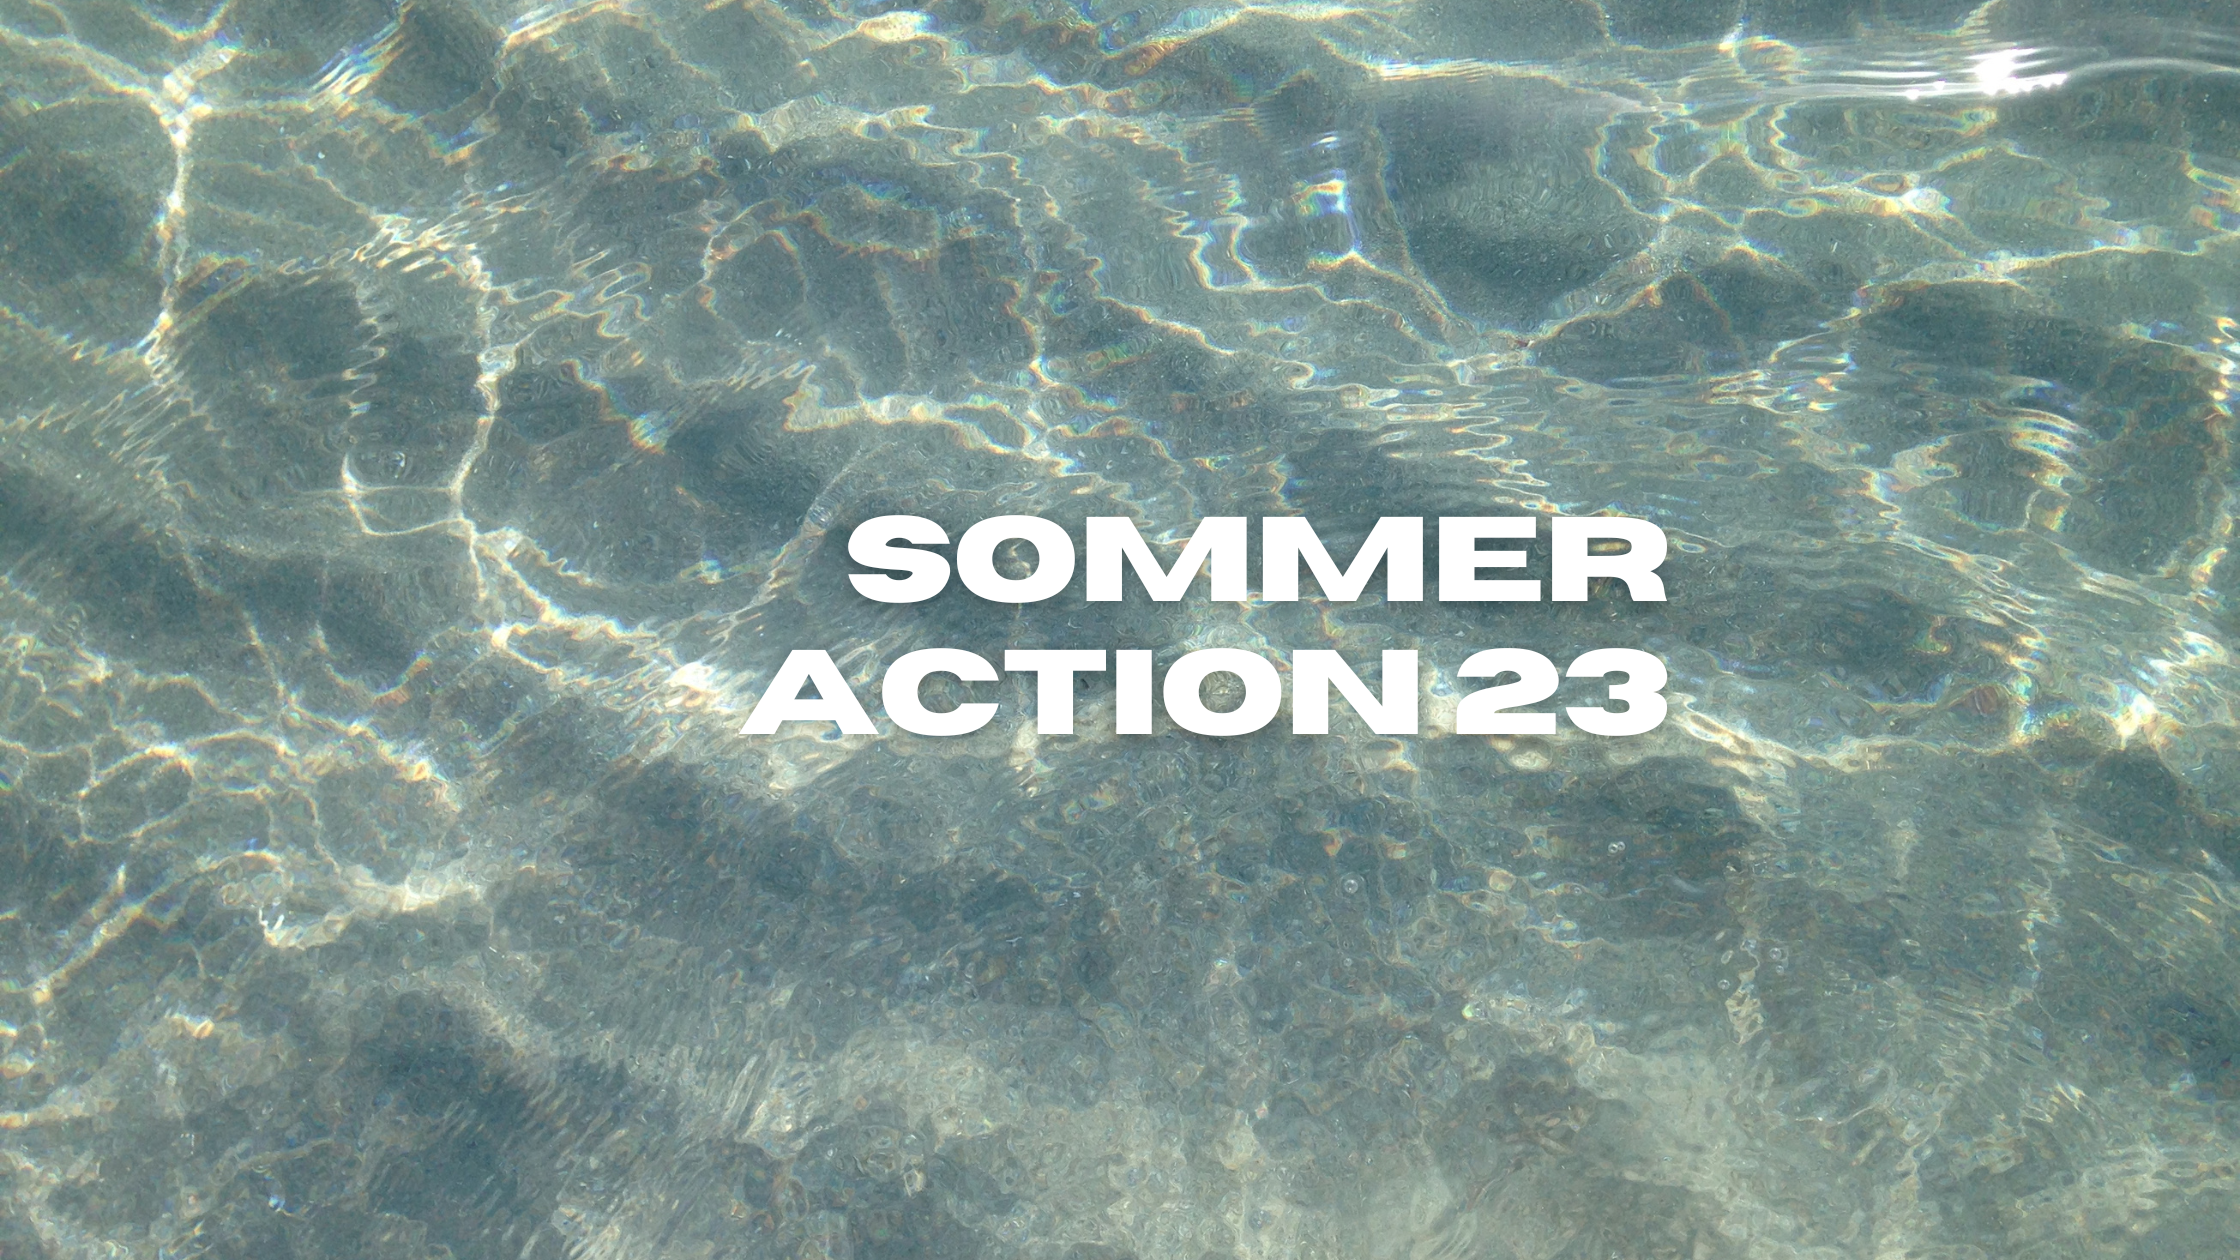 SOMMERACTION 23